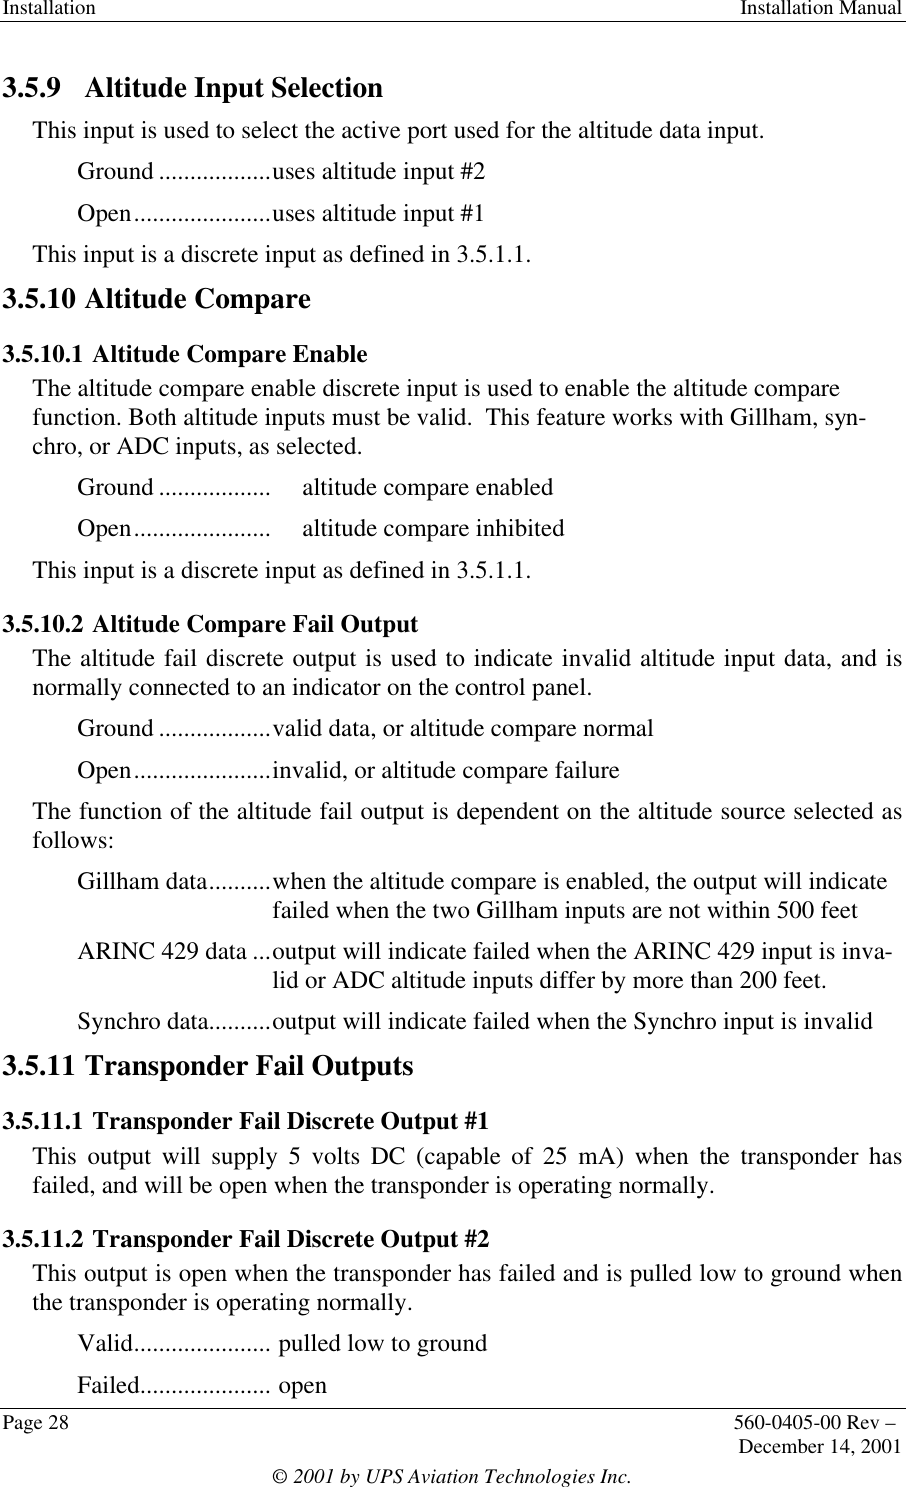 Installation  Installation ManualPage 28 560-0405-00 Rev –December 14, 2001© 2001 by UPS Aviation Technologies Inc.3.5.9  Altitude Input SelectionThis input is used to select the active port used for the altitude data input.Ground ..................uses altitude input #2Open......................uses altitude input #1This input is a discrete input as defined in 3.5.1.1.3.5.10  Altitude Compare3.5.10.1 Altitude Compare EnableThe altitude compare enable discrete input is used to enable the altitude comparefunction. Both altitude inputs must be valid.  This feature works with Gillham, syn-chro, or ADC inputs, as selected.Ground .................. altitude compare enabledOpen...................... altitude compare inhibitedThis input is a discrete input as defined in 3.5.1.1.3.5.10.2 Altitude Compare Fail OutputThe altitude fail discrete output is used to indicate invalid altitude input data, and isnormally connected to an indicator on the control panel.Ground ..................valid data, or altitude compare normalOpen......................invalid, or altitude compare failureThe function of the altitude fail output is dependent on the altitude source selected asfollows:Gillham data..........when the altitude compare is enabled, the output will indicatefailed when the two Gillham inputs are not within 500 feetARINC 429 data ...output will indicate failed when the ARINC 429 input is inva-lid or ADC altitude inputs differ by more than 200 feet.Synchro data..........output will indicate failed when the Synchro input is invalid3.5.11  Transponder Fail Outputs3.5.11.1 Transponder Fail Discrete Output #1This output will supply 5 volts DC (capable of 25 mA) when the transponder hasfailed, and will be open when the transponder is operating normally.3.5.11.2 Transponder Fail Discrete Output #2This output is open when the transponder has failed and is pulled low to ground whenthe transponder is operating normally.Valid...................... pulled low to groundFailed..................... open